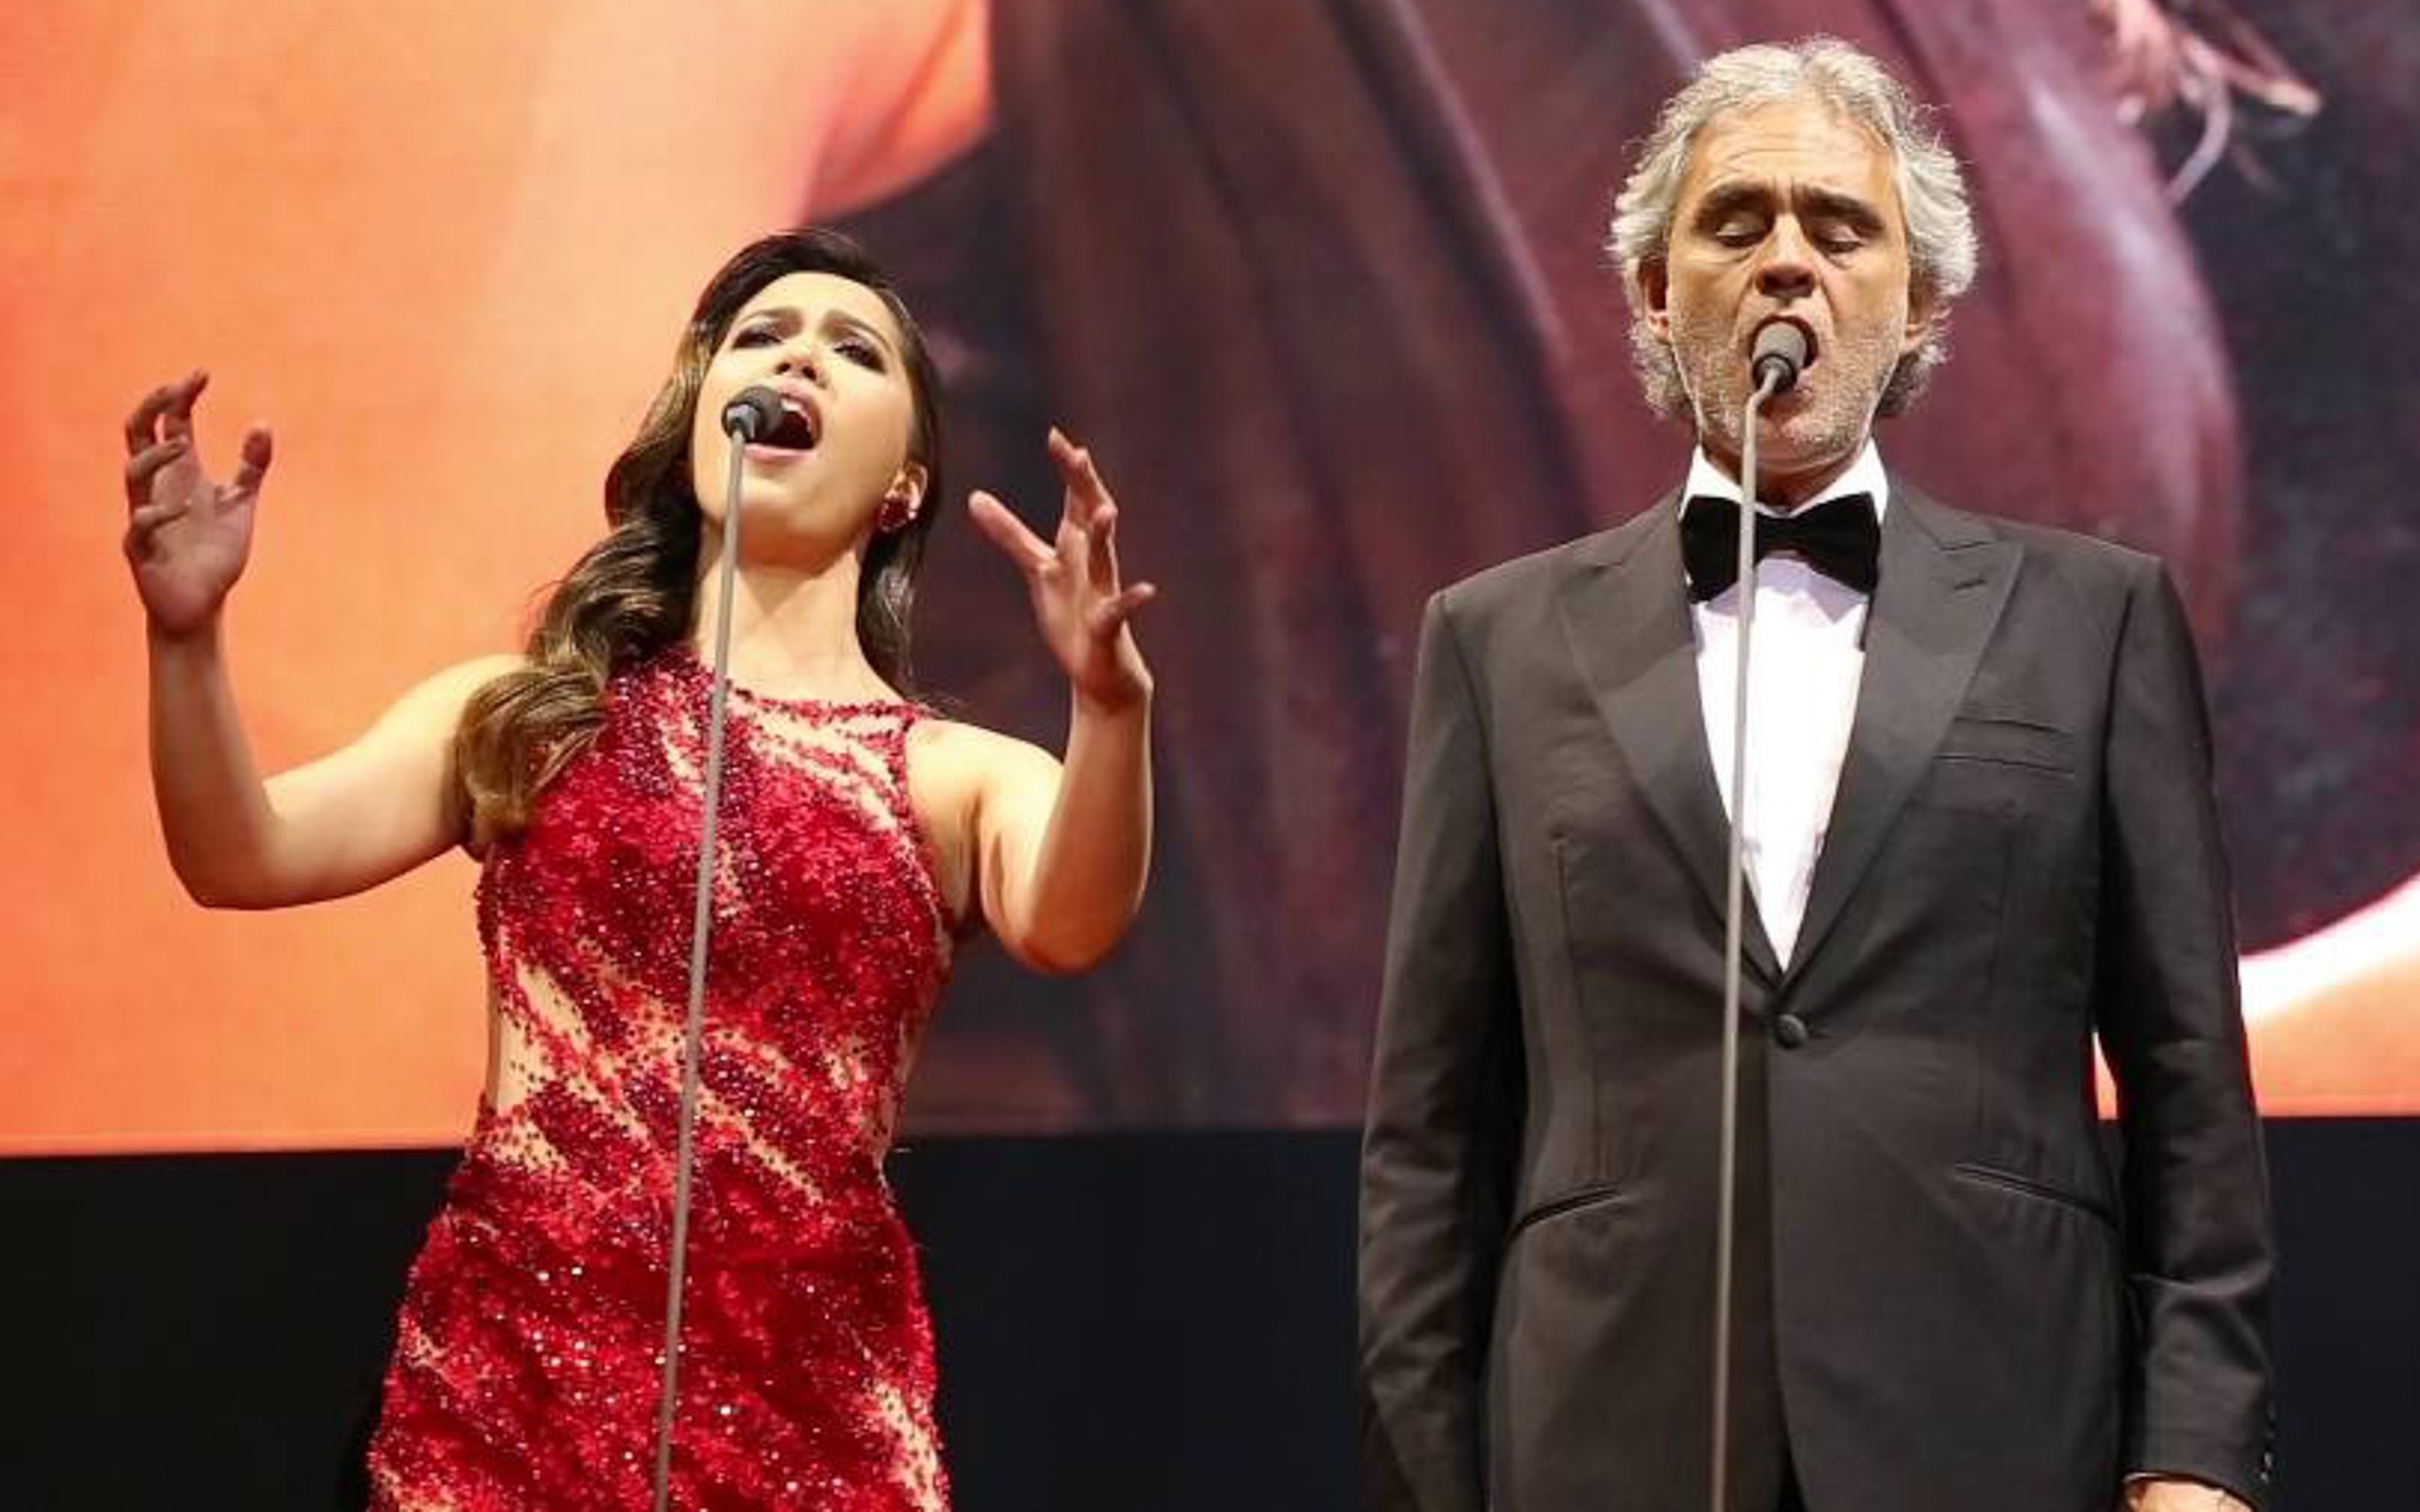 DREAM COME TRUE. Christine, who grew up listening to Andrea Bocelli, says she never imagined she would ever perform with him. Photo by Roberto Vivancos Studios 